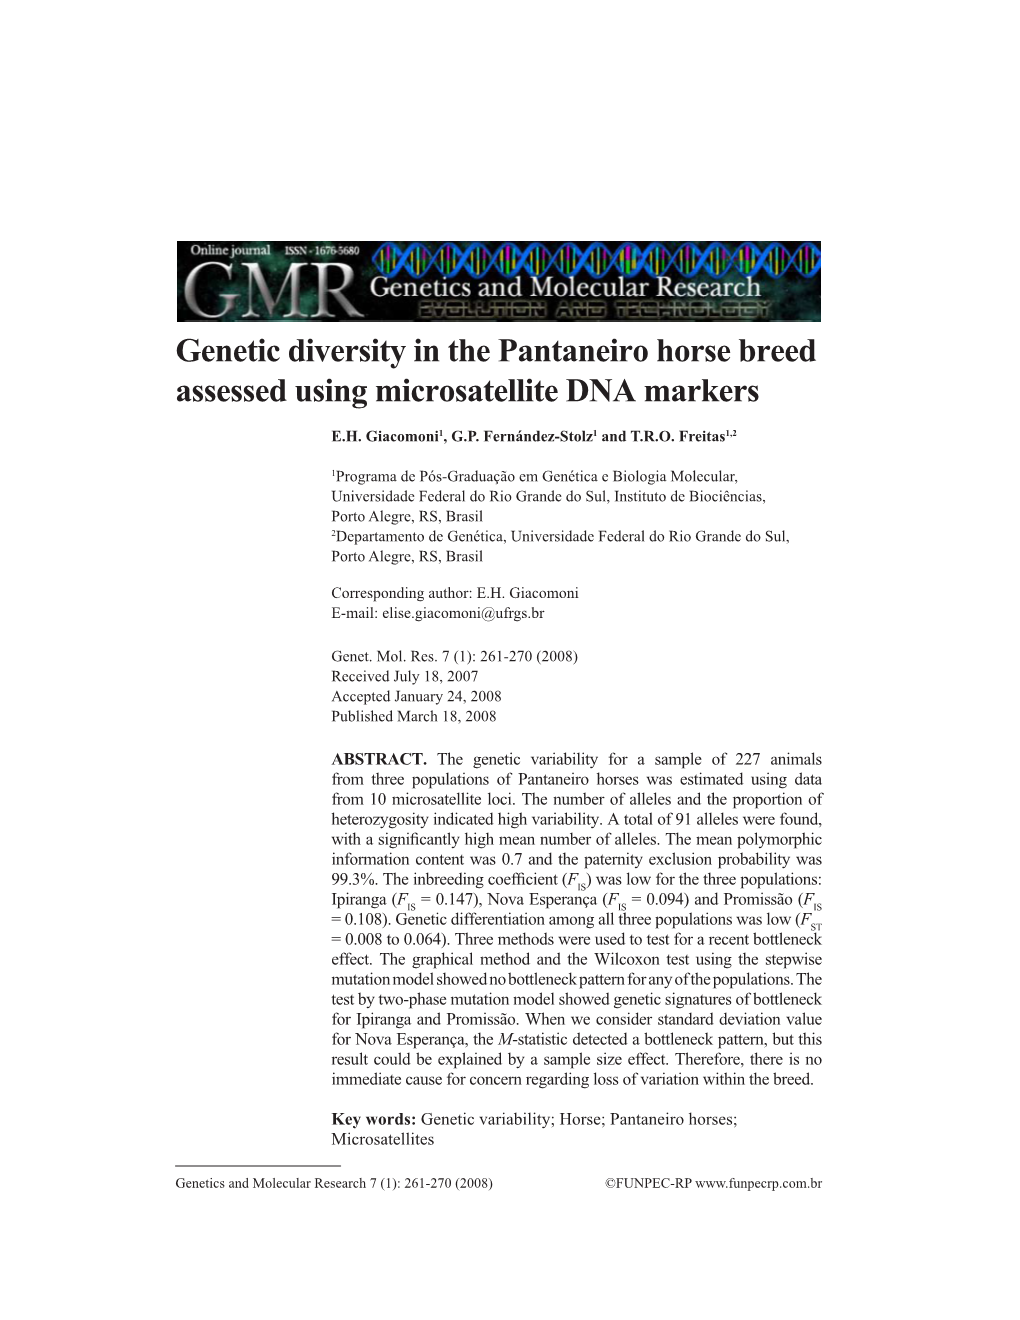 Genetic Diversity in the Pantaneiro Horse Breed Assessed Using Microsatellite DNA Markers